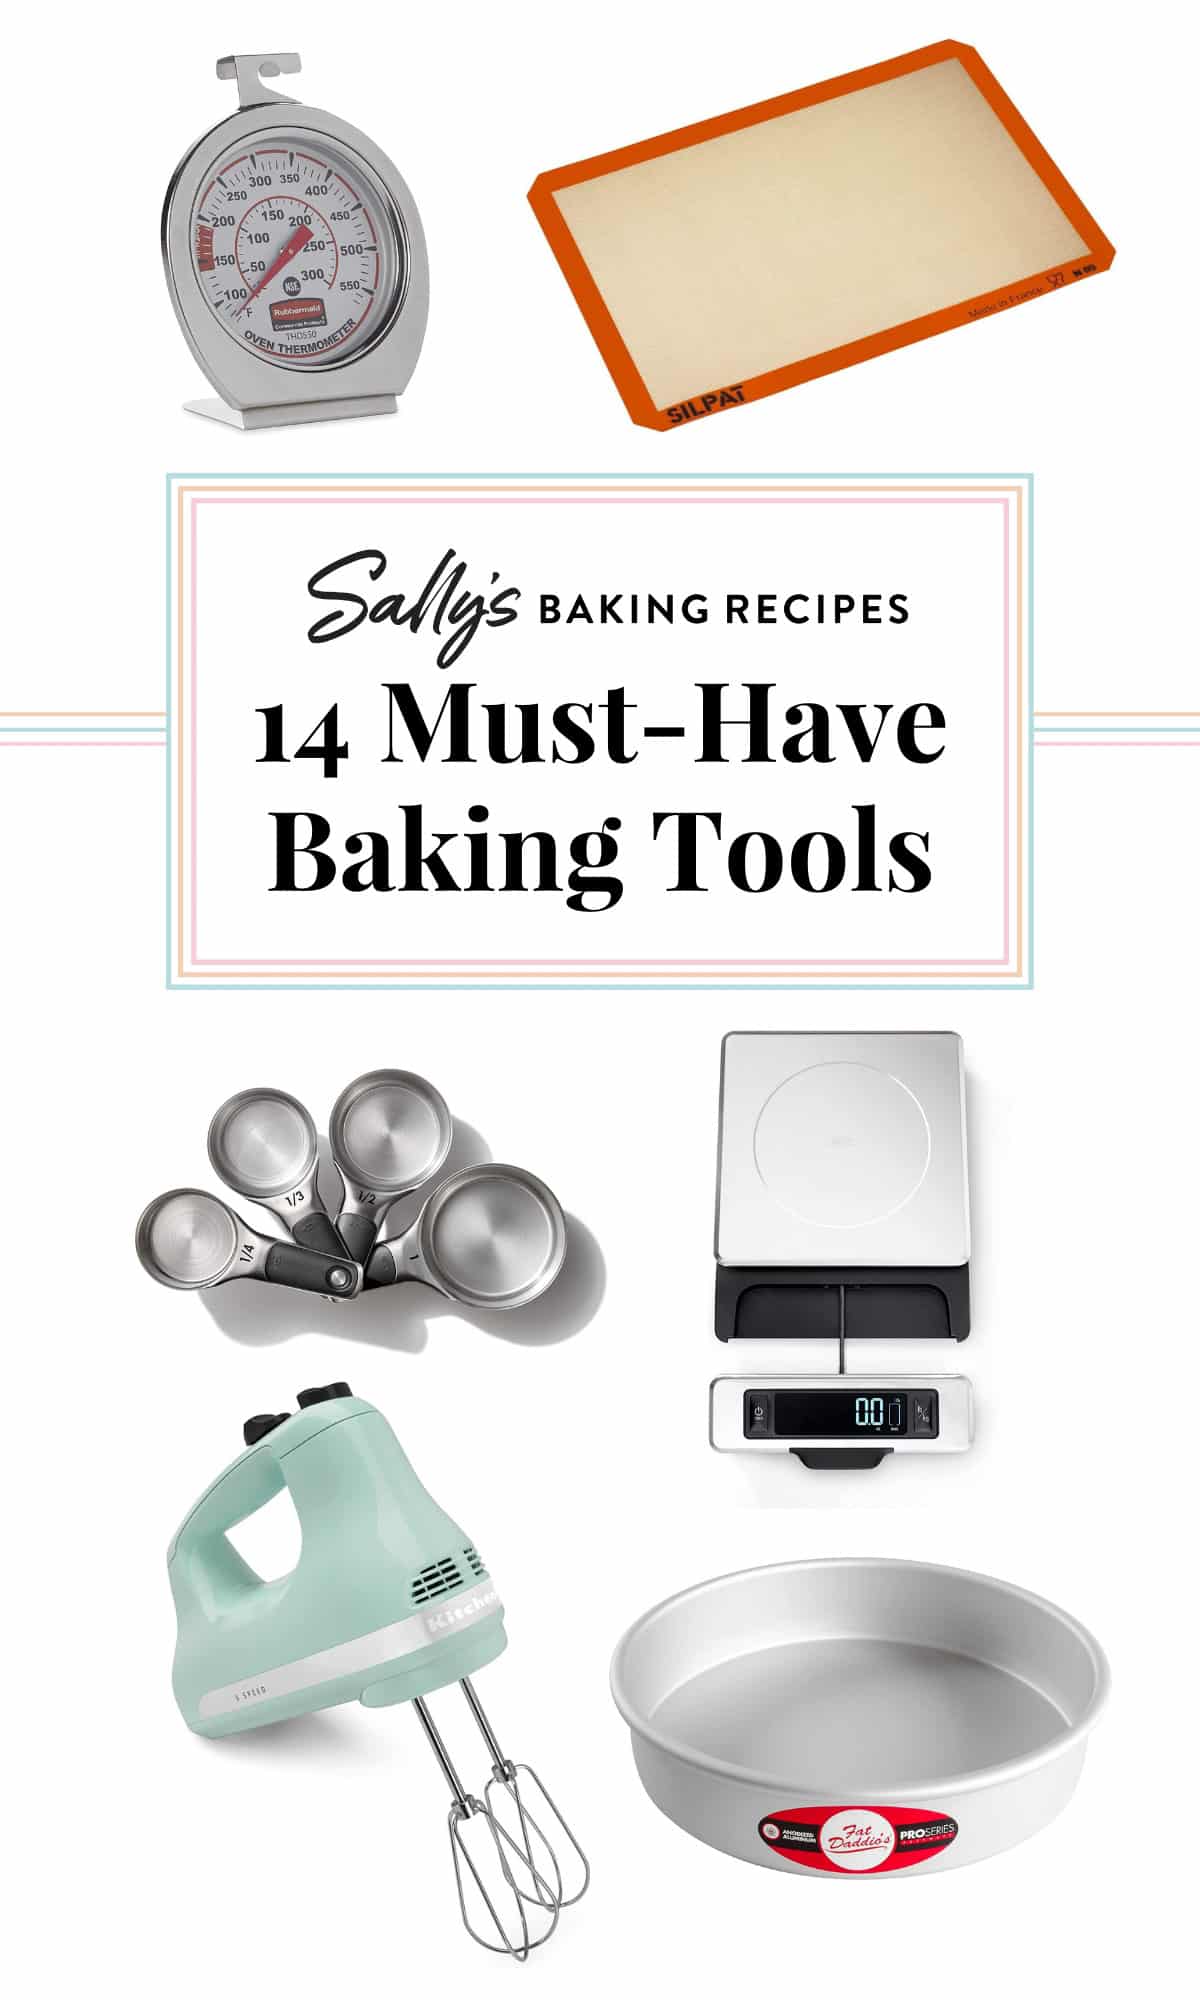 graphic displaying kitchen tools photos with text 14 must have baking tools on top.